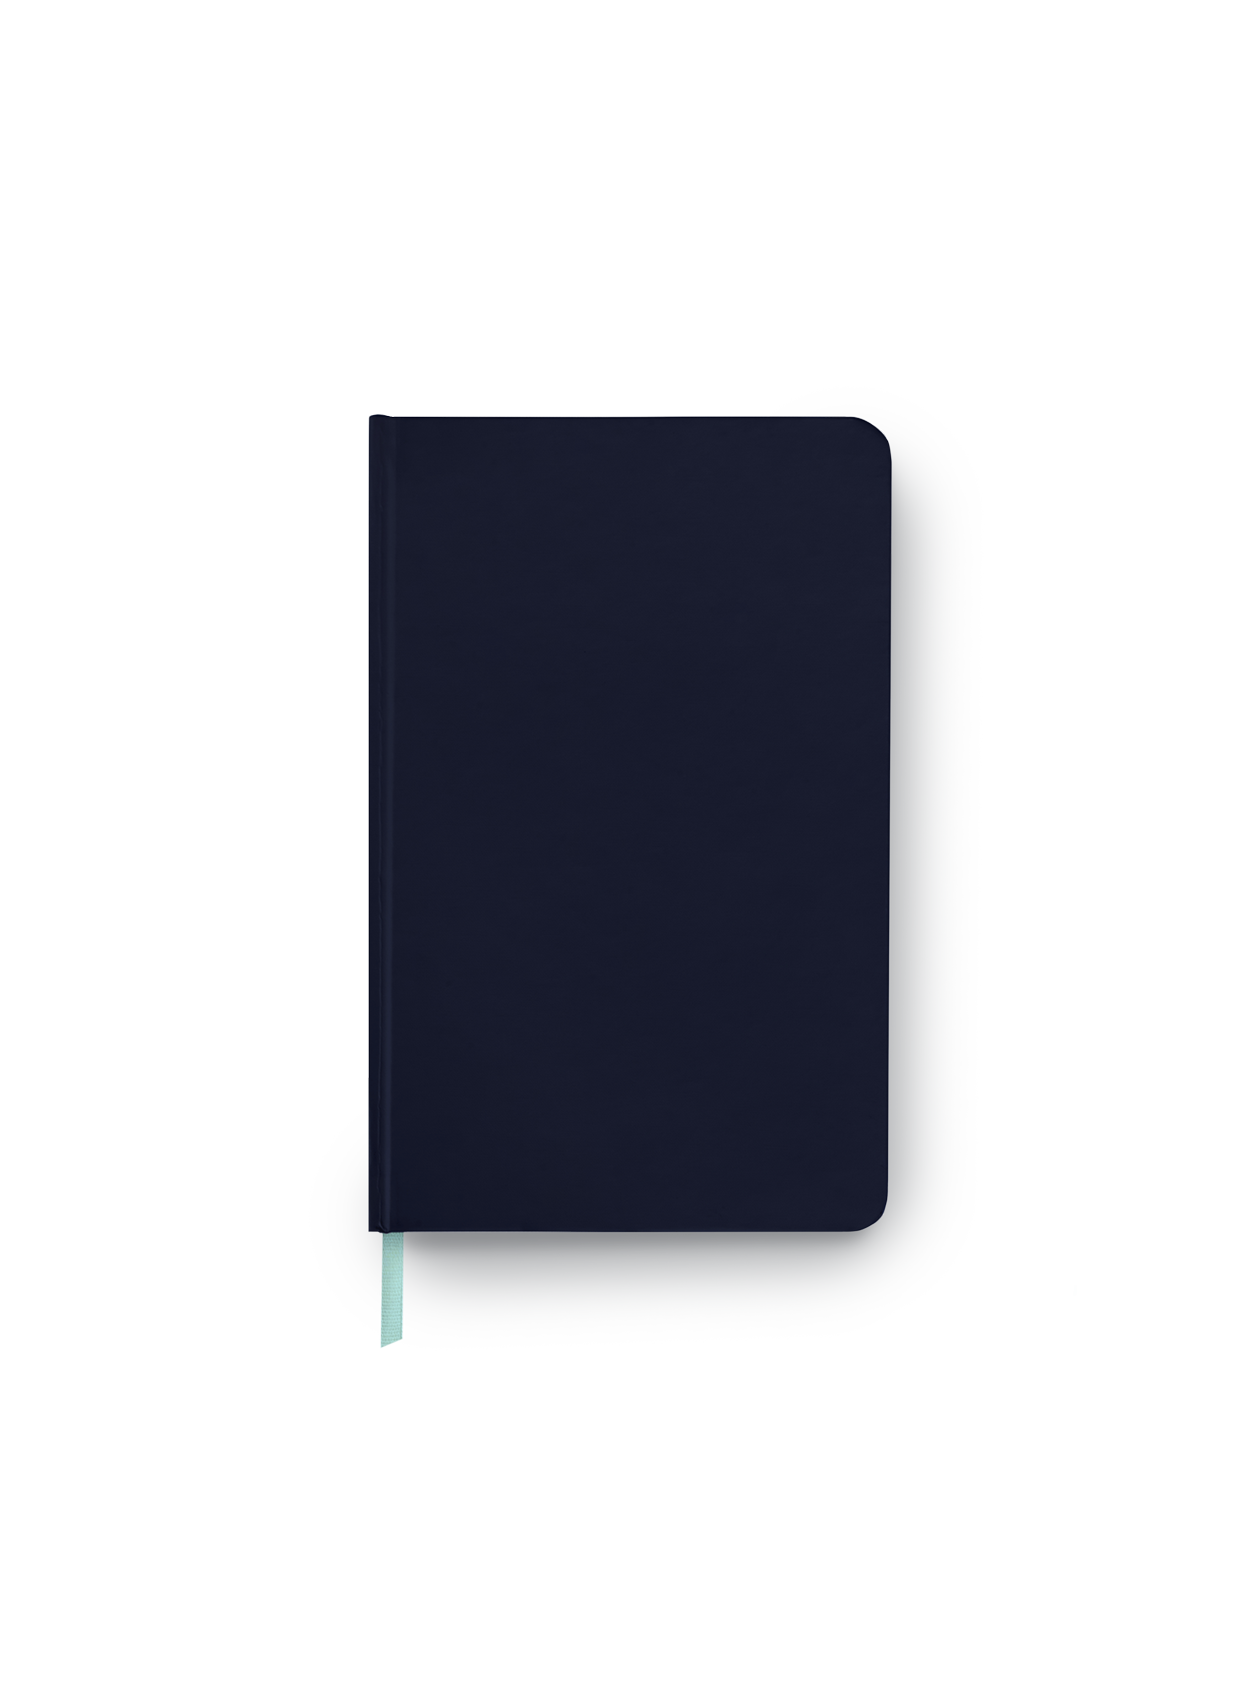 Appointed A5 Journal in Oxford Blue leather-like exterior with smyth-sewn binding front view || Oxford Blue